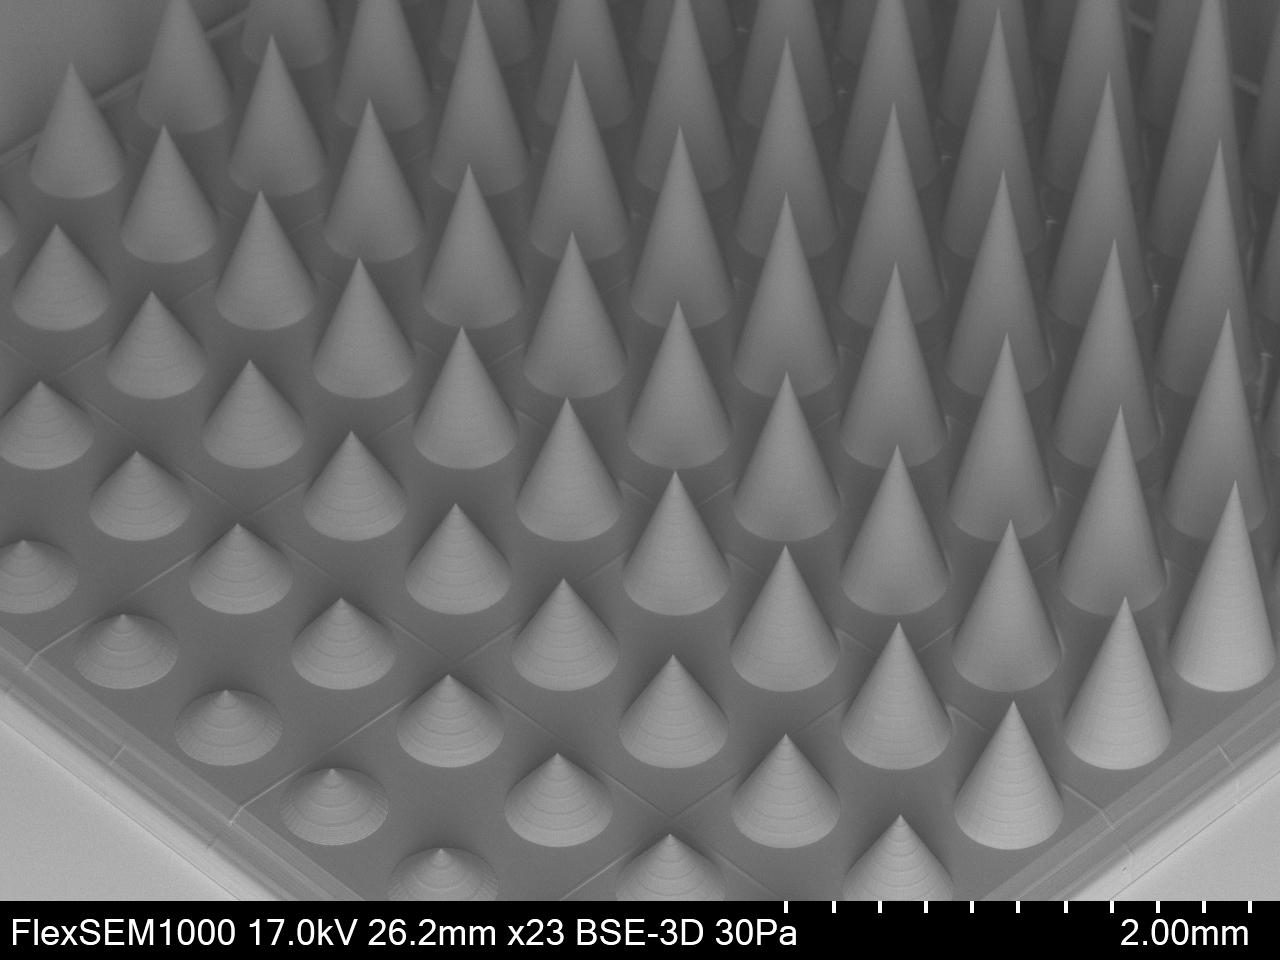 An array of micro-needles with individual base diameters of 500µm and varying heights from 260µm to 2,000µm fabricated using adaptive resolutions. Image via UpNano.